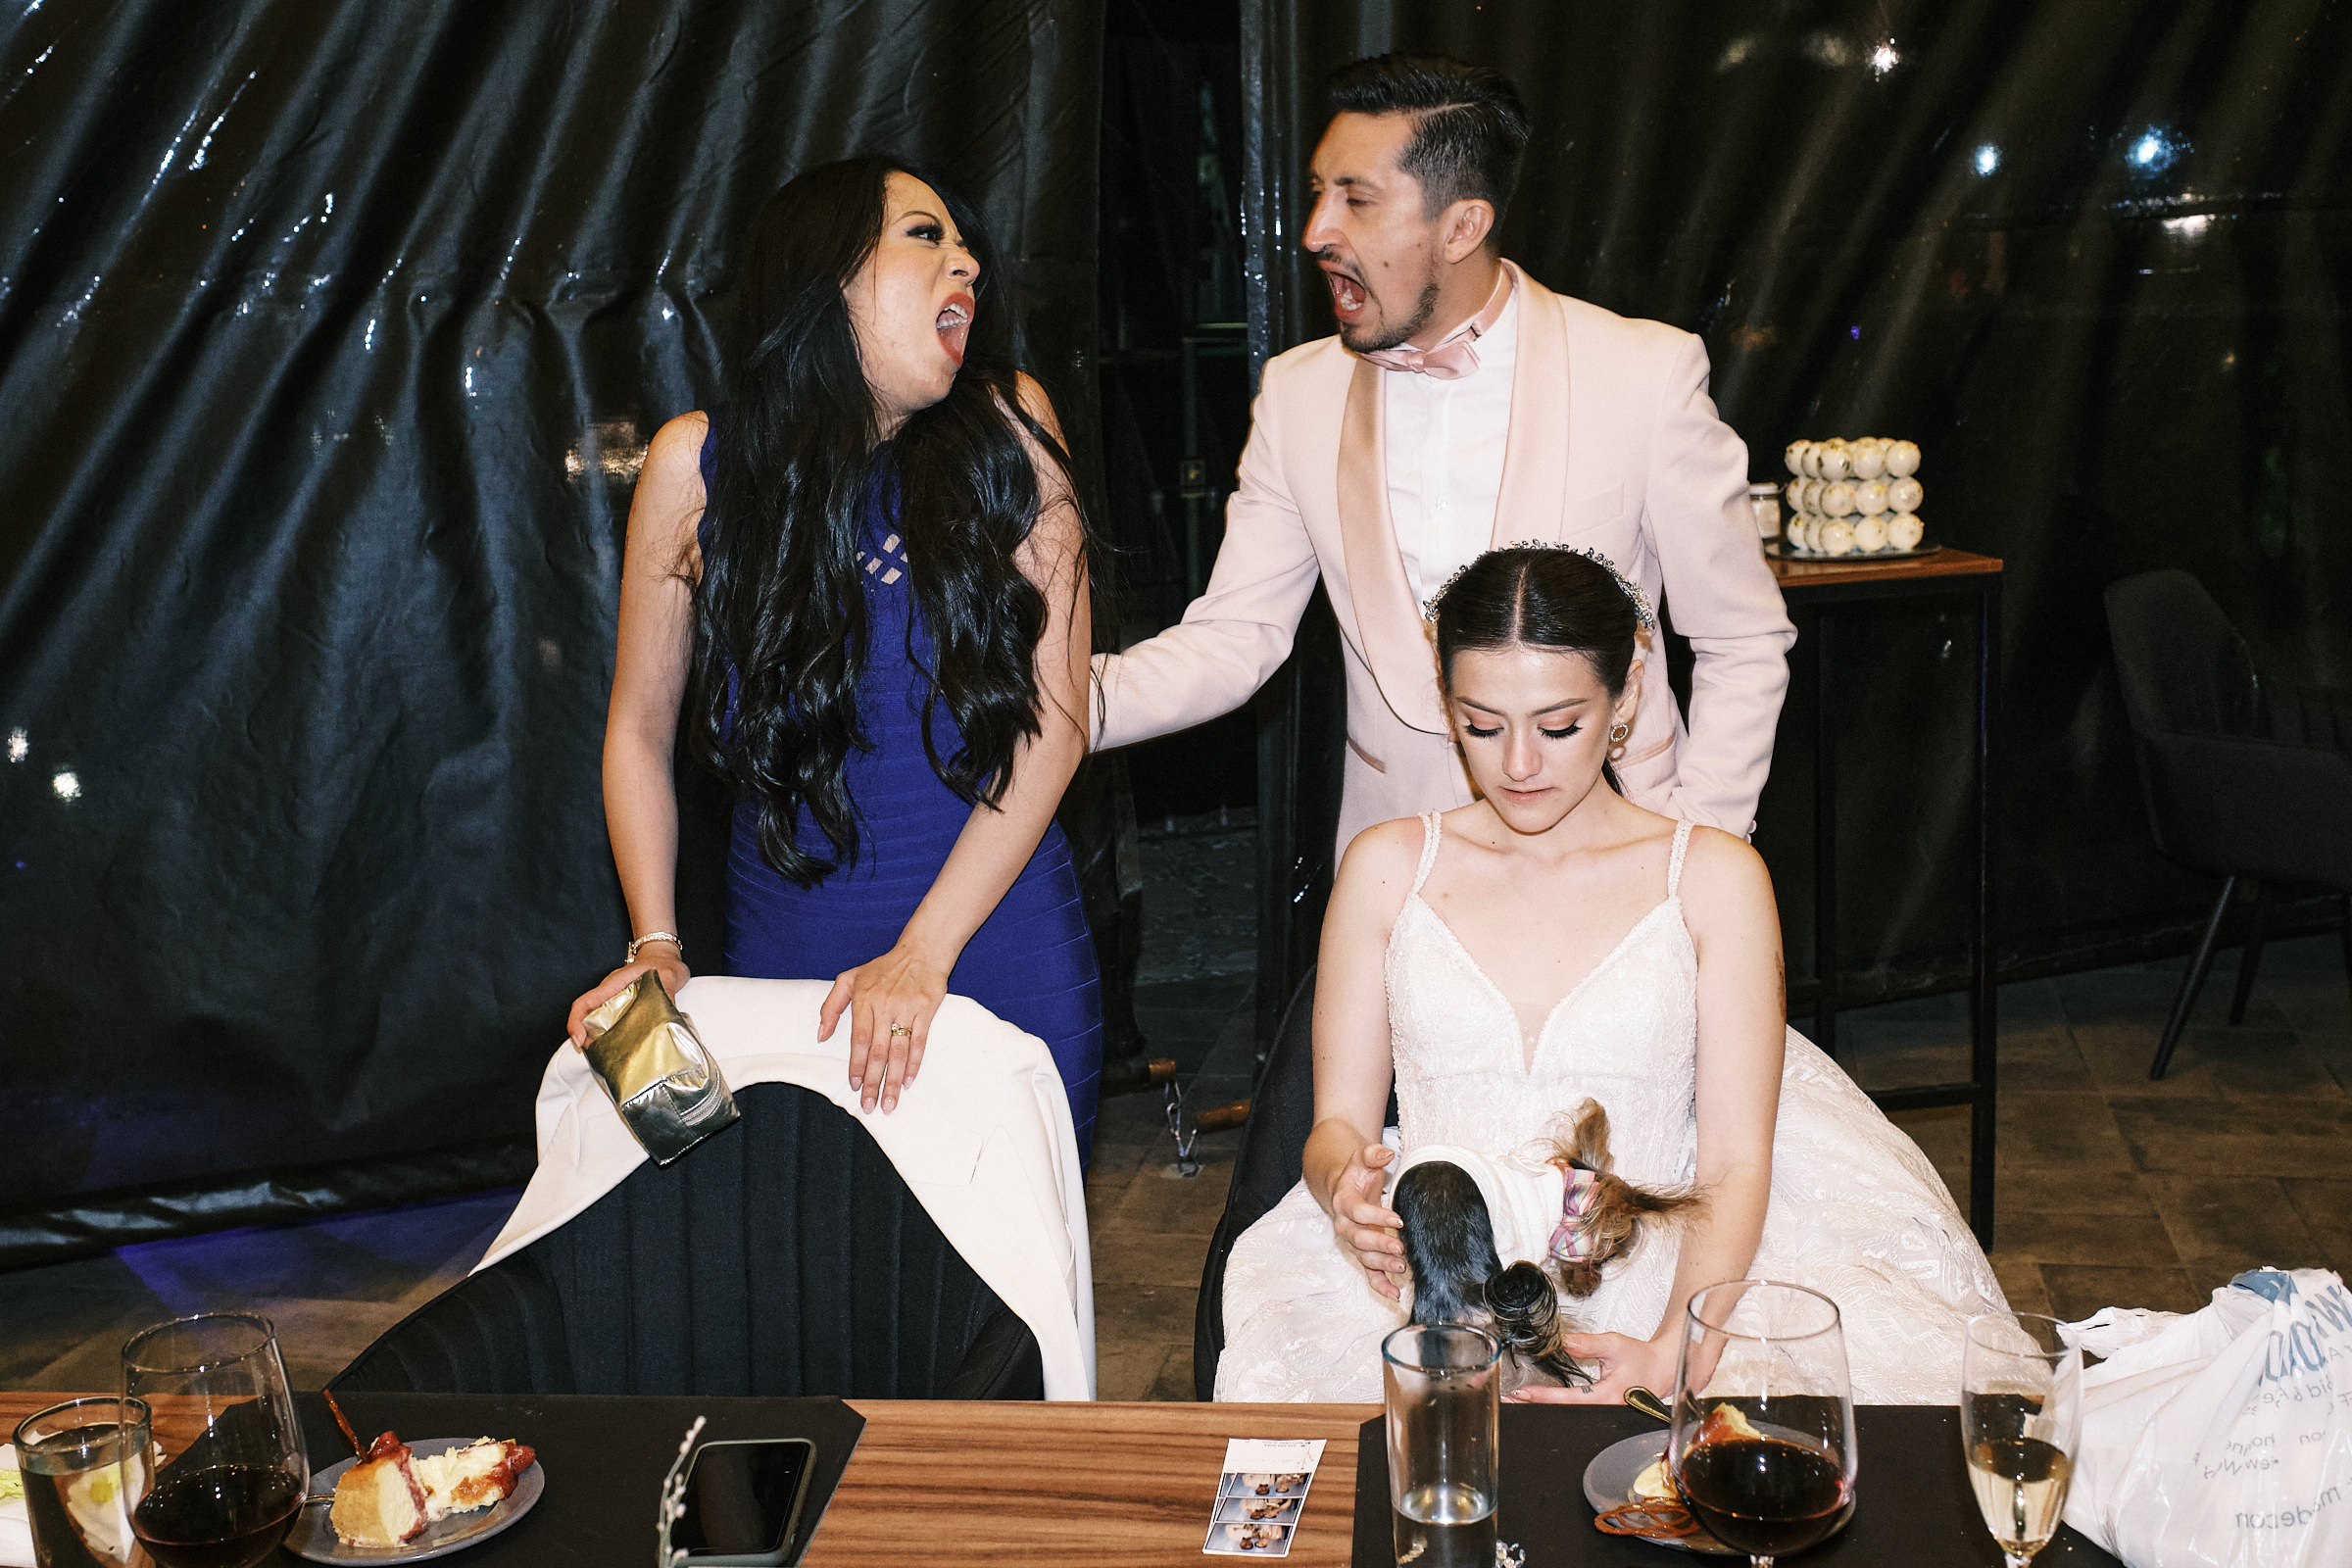 Wedding Guests Opening Their Mouth In Sync Behind Bride At Reception